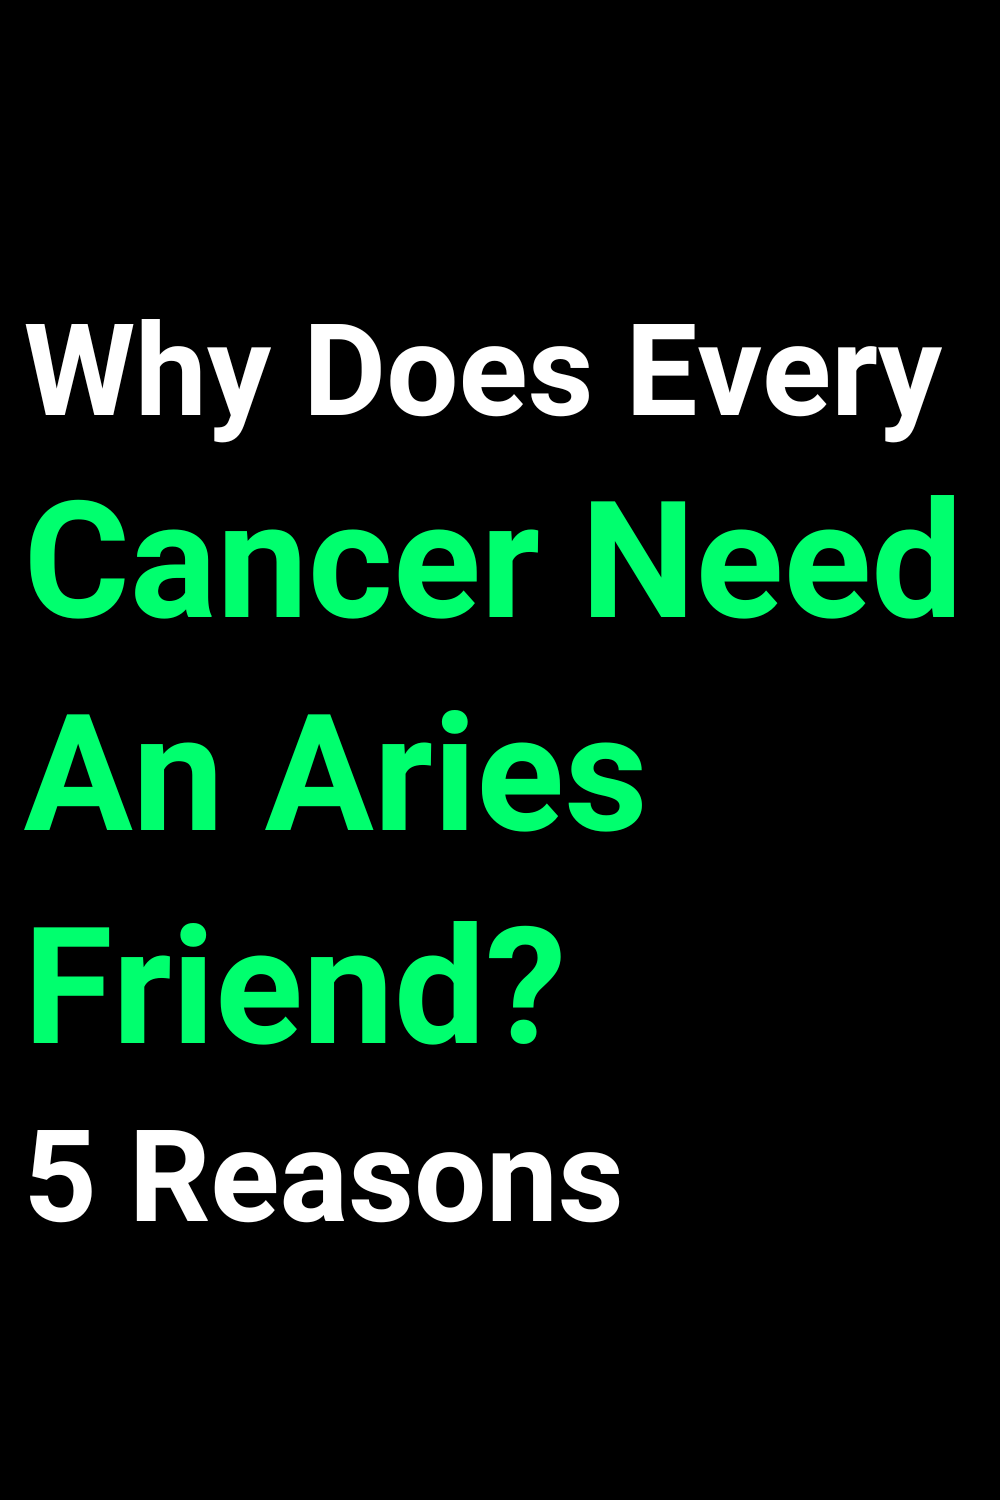 Why Does Every Cancer Need An Aries Friend? 5 Reasons